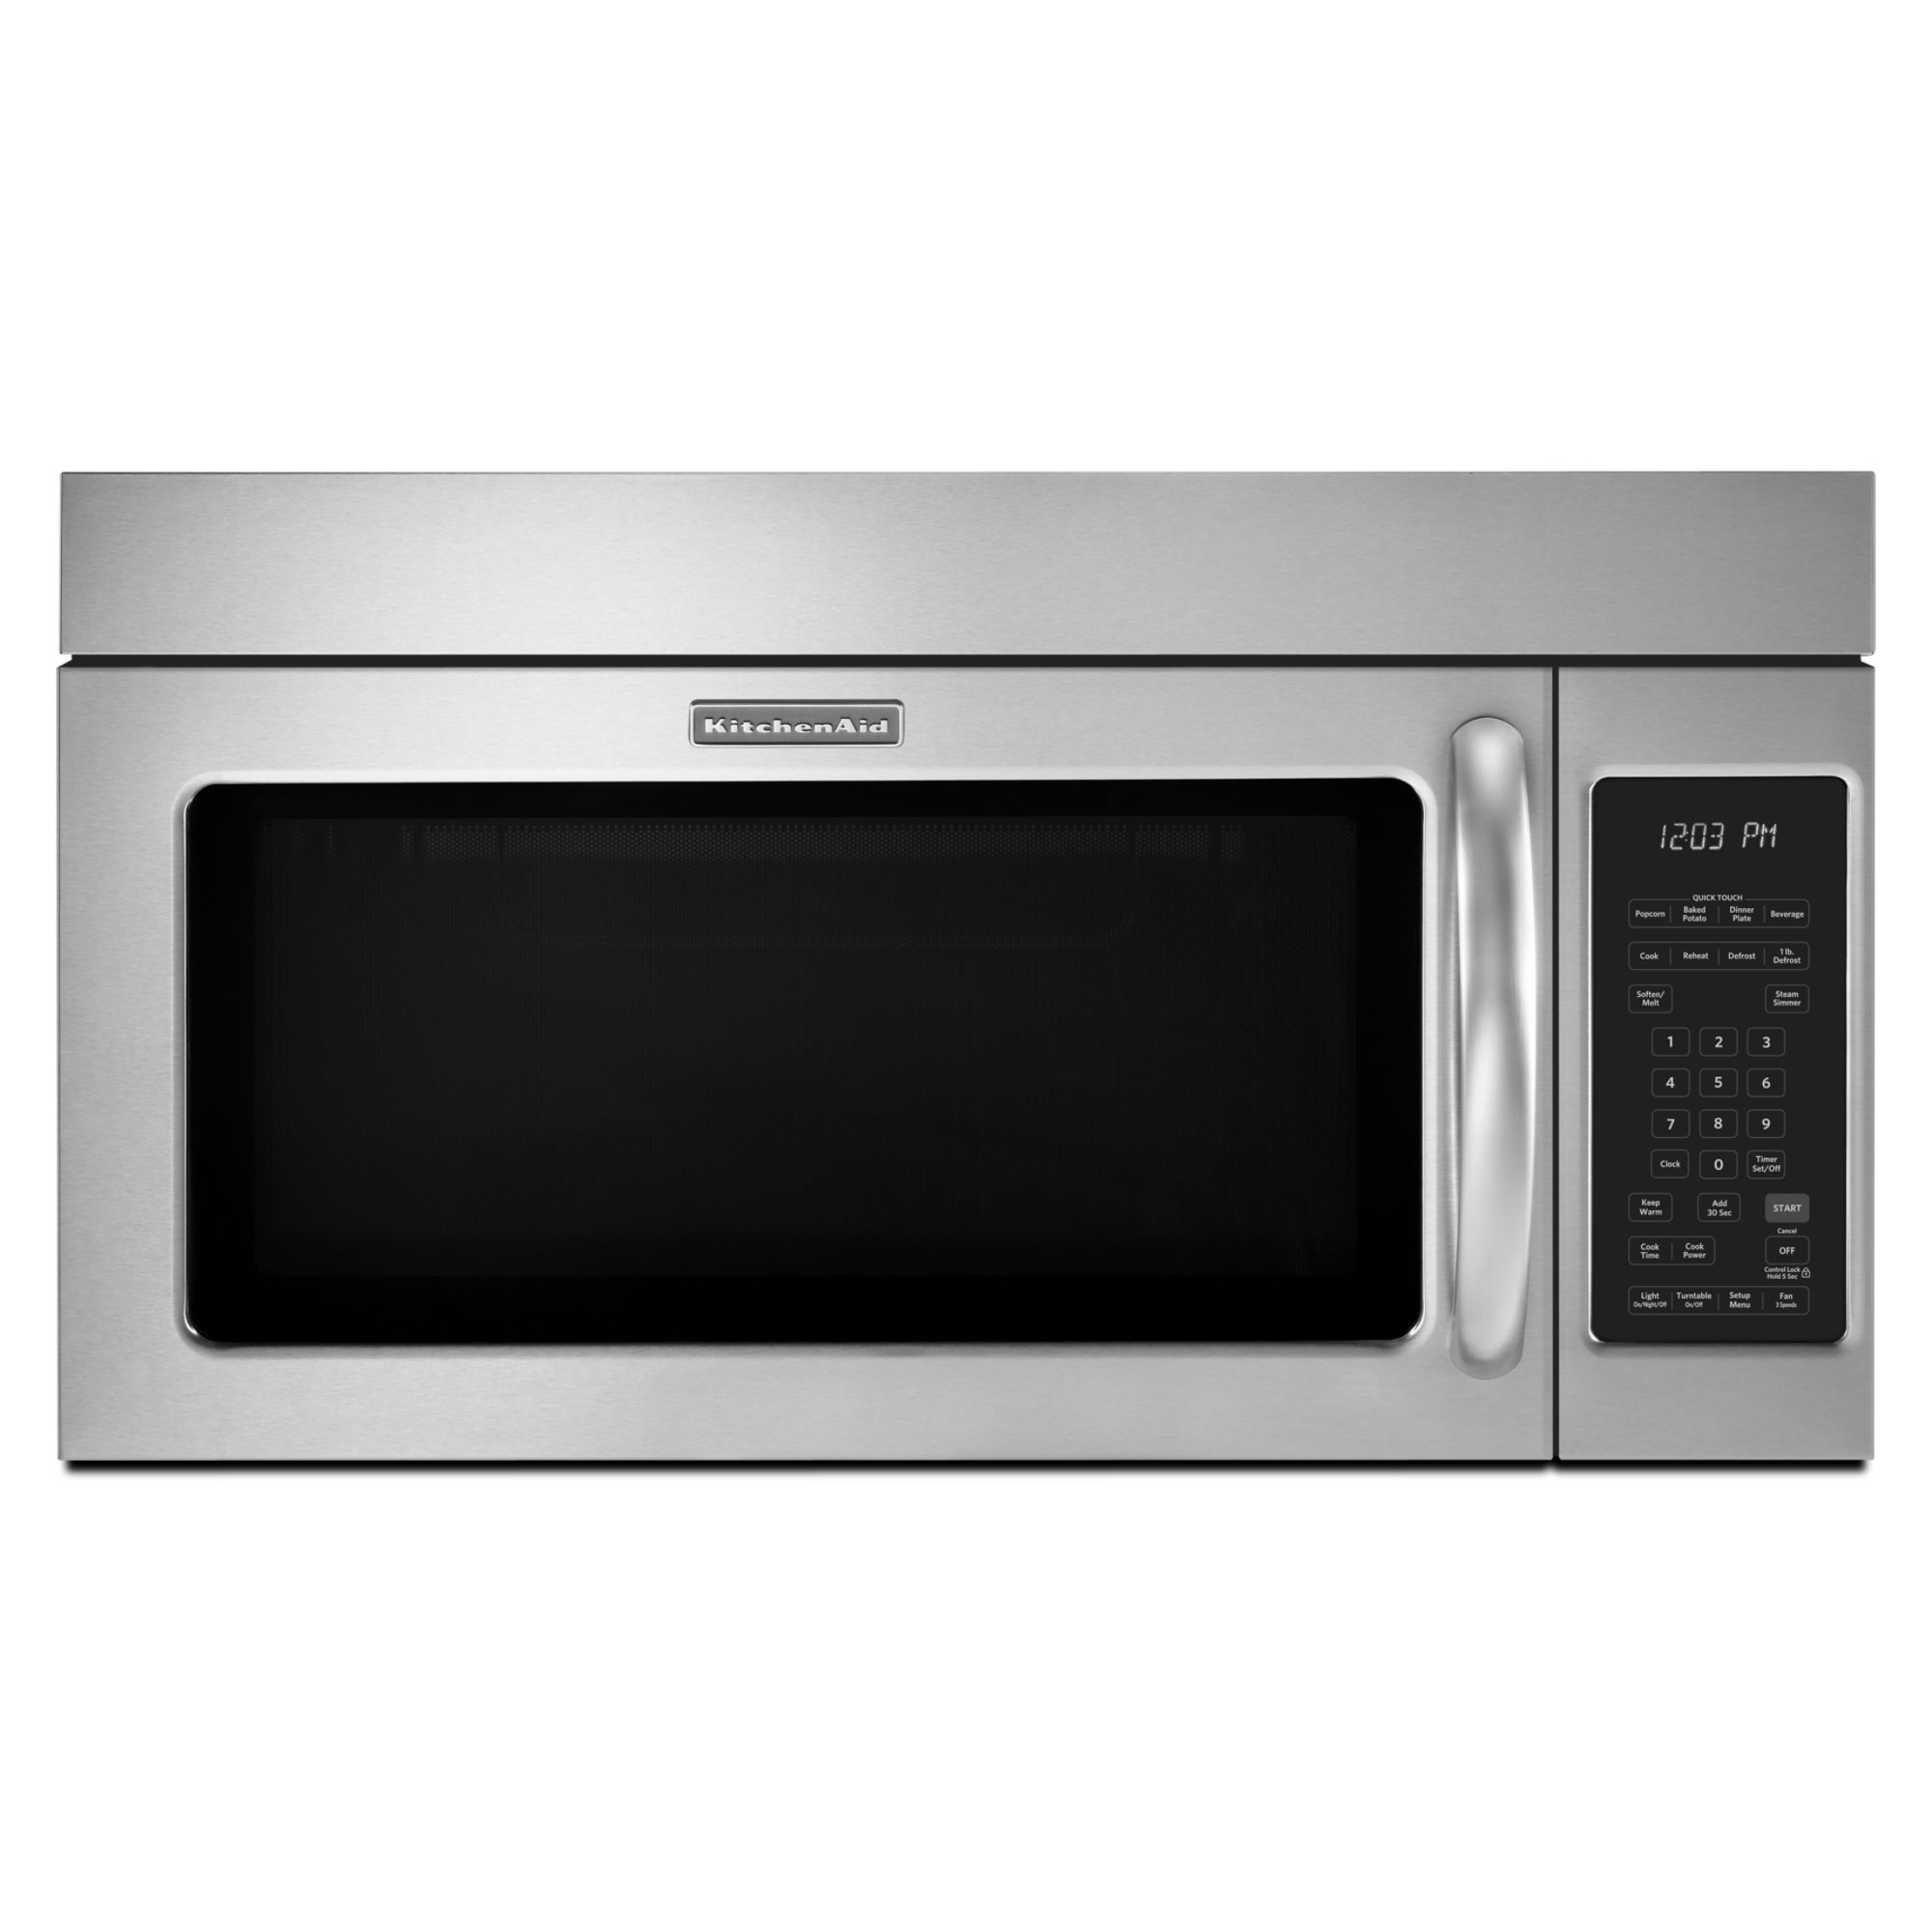 KitchenAid 2.0 cu. ft. Microwave Hood Combination Oven - Stainless Steel